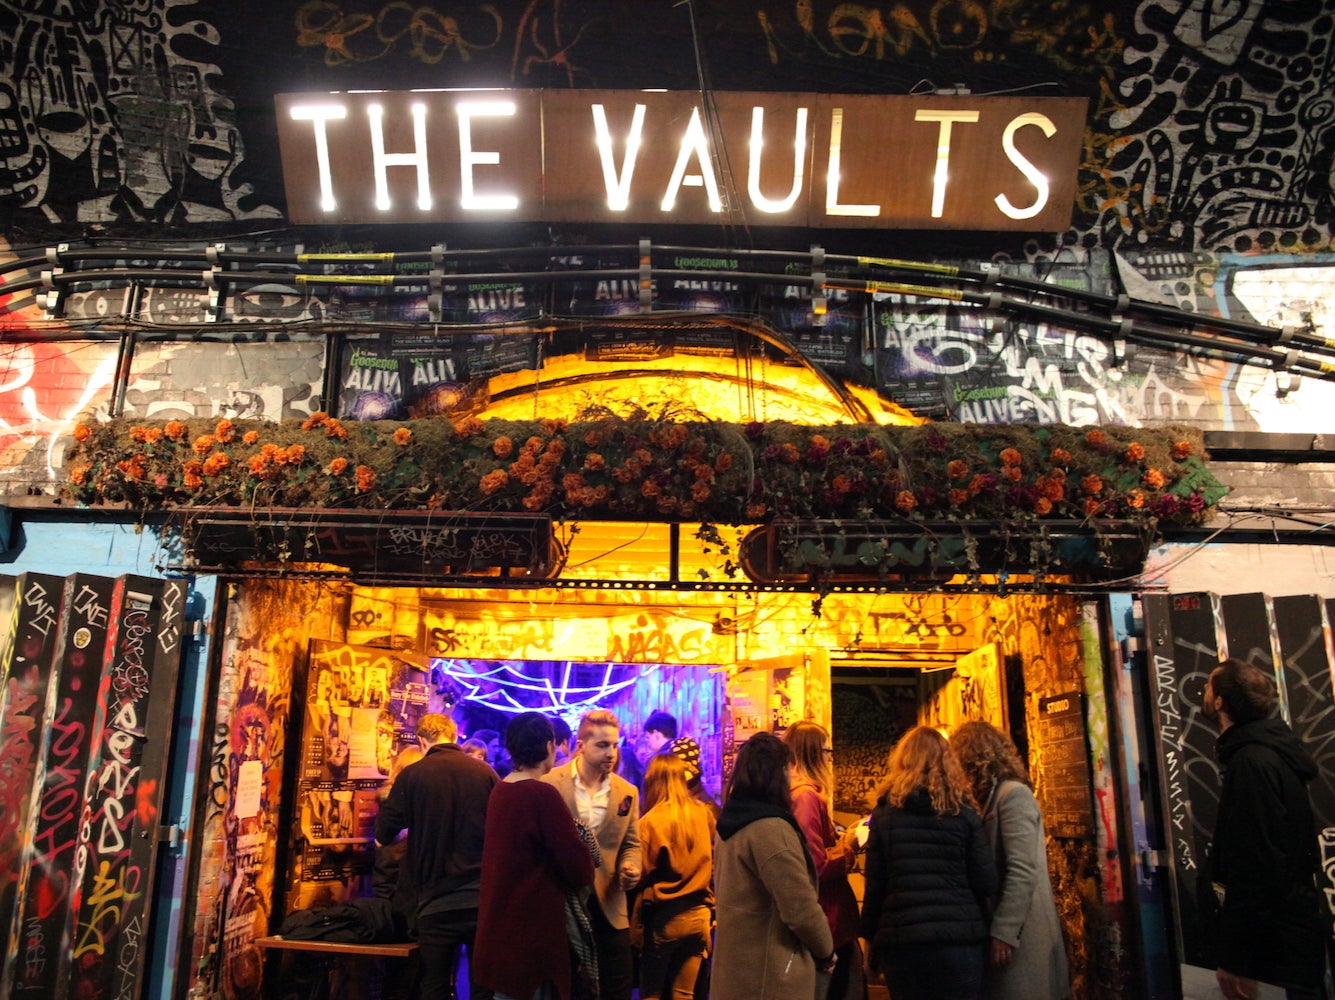 Tunnel vision: The Vaults near Waterloo